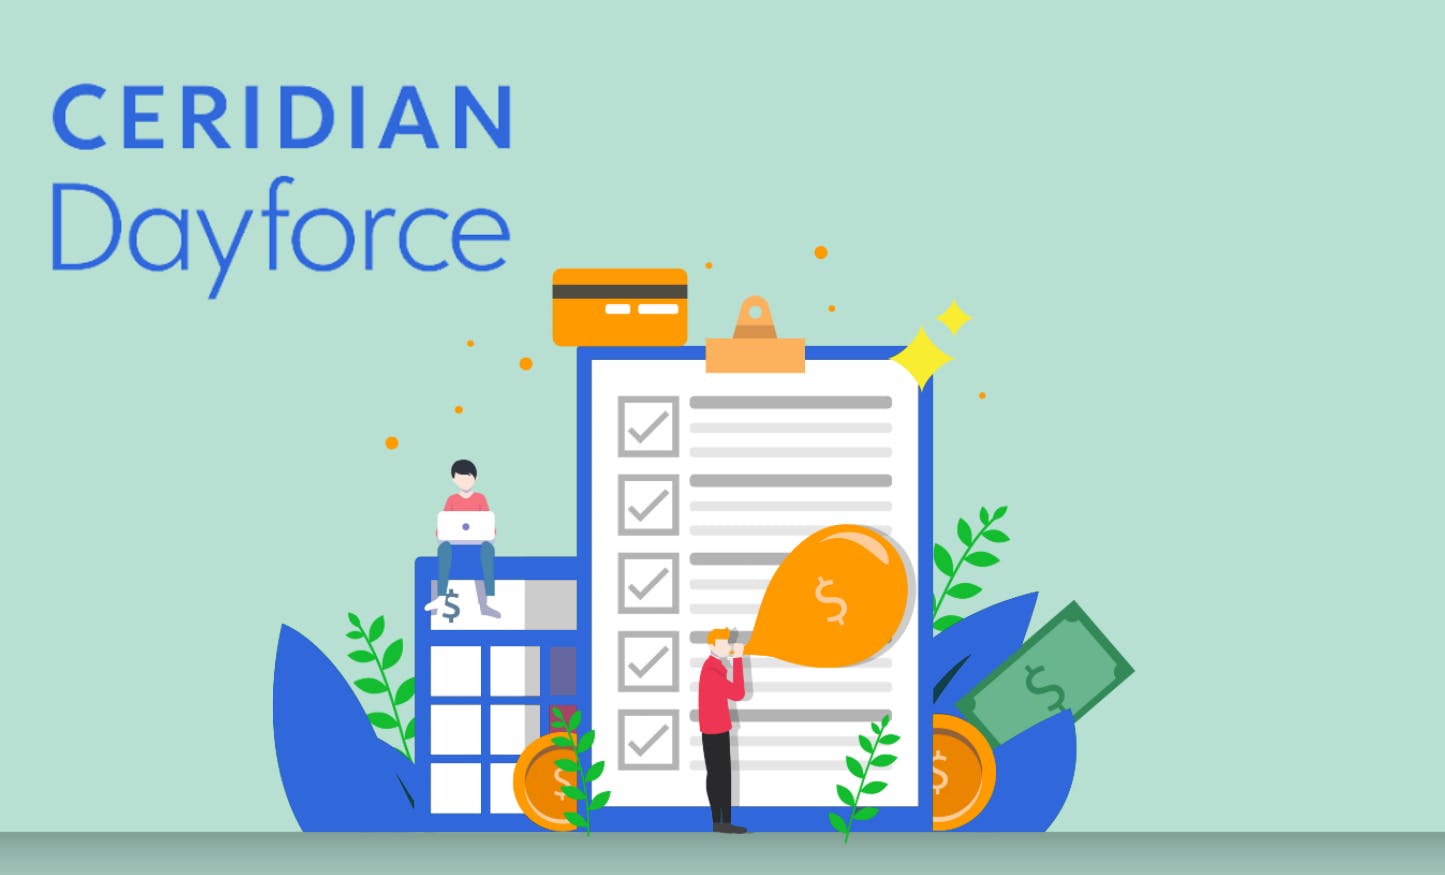 Dayforce by Ceridian Review: Pros and Cons, Prices, Features, and Alternatives